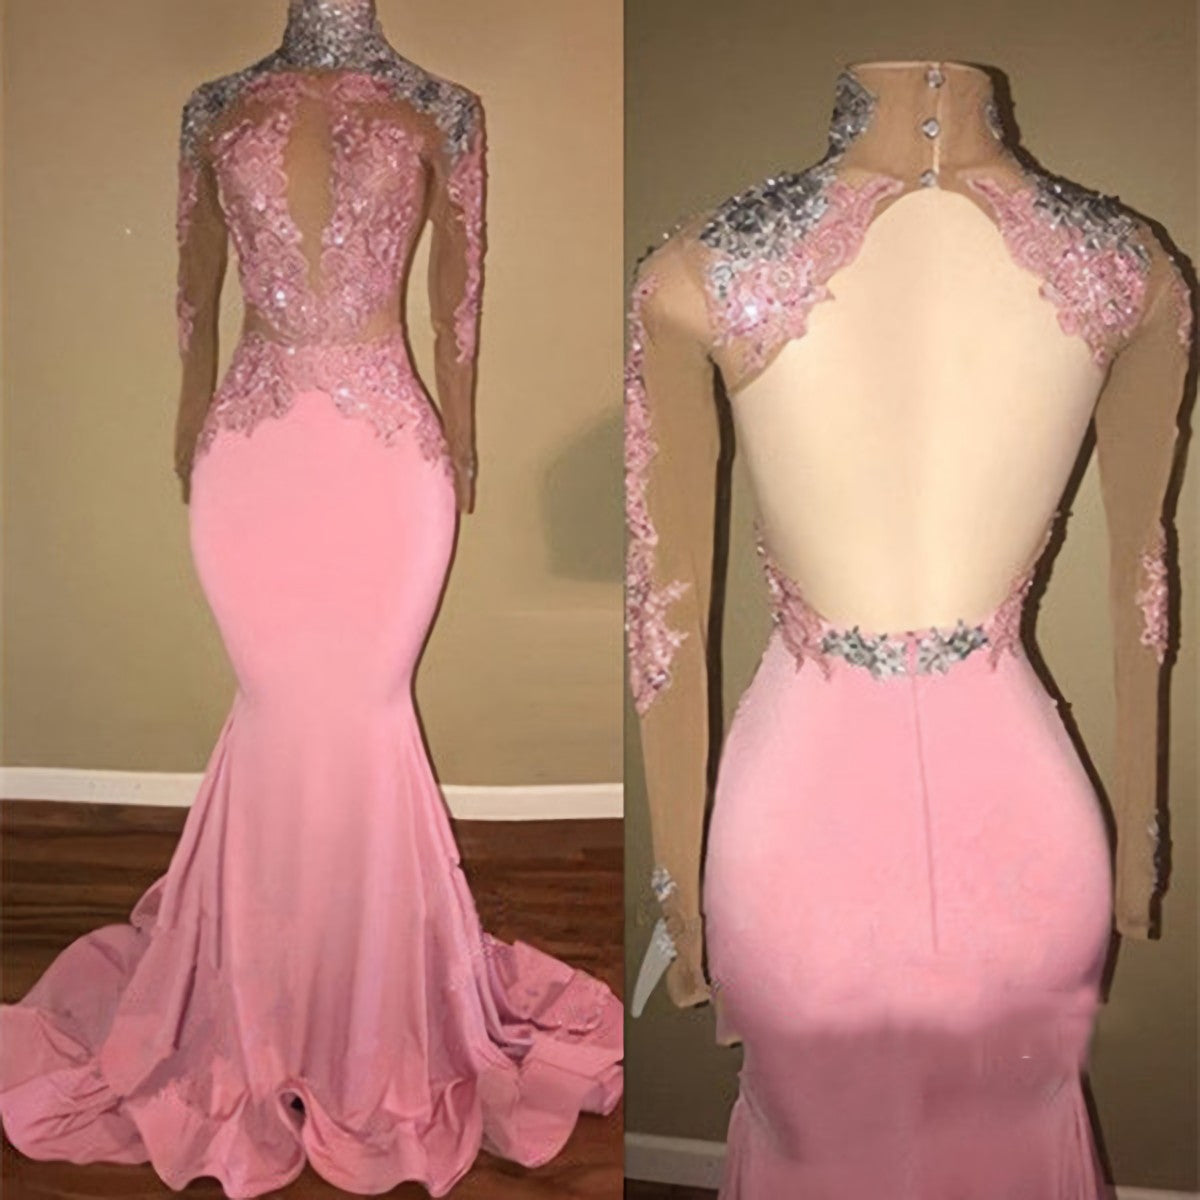 Prom Dresses Patterned, Mermaid Backless Long Sleeves Pink See Through African Long Prom Dresses